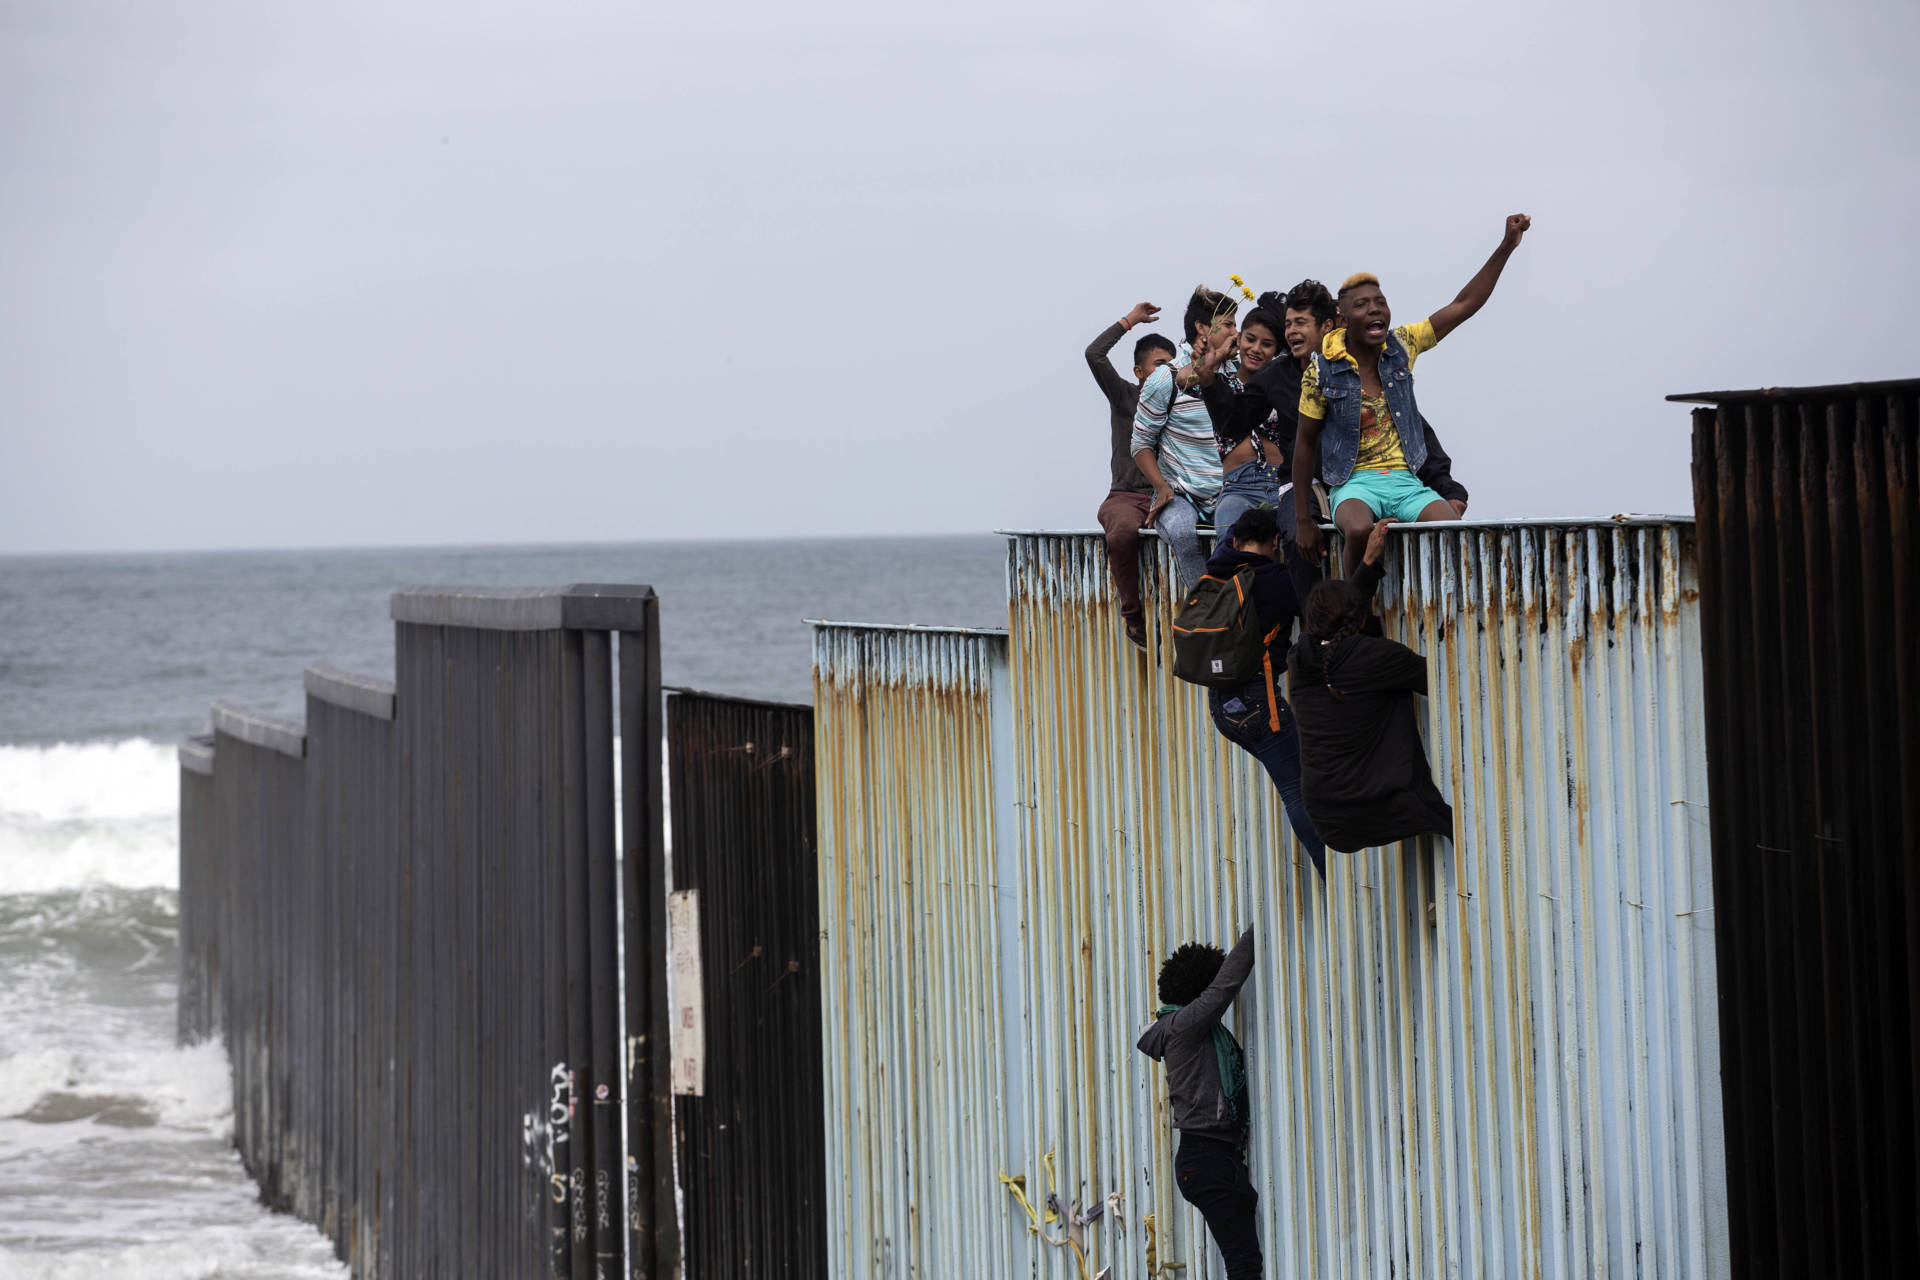 Some Central American migrants traveling in the "Migrant Via Crucis" caravan climbed the wall to sit and wave signs under the watchful eyes of U.S. Border Patrol agents at the US/Mexico Border at Tijuana's beaches, Baja California state, Mexico, on April 29, 2018.